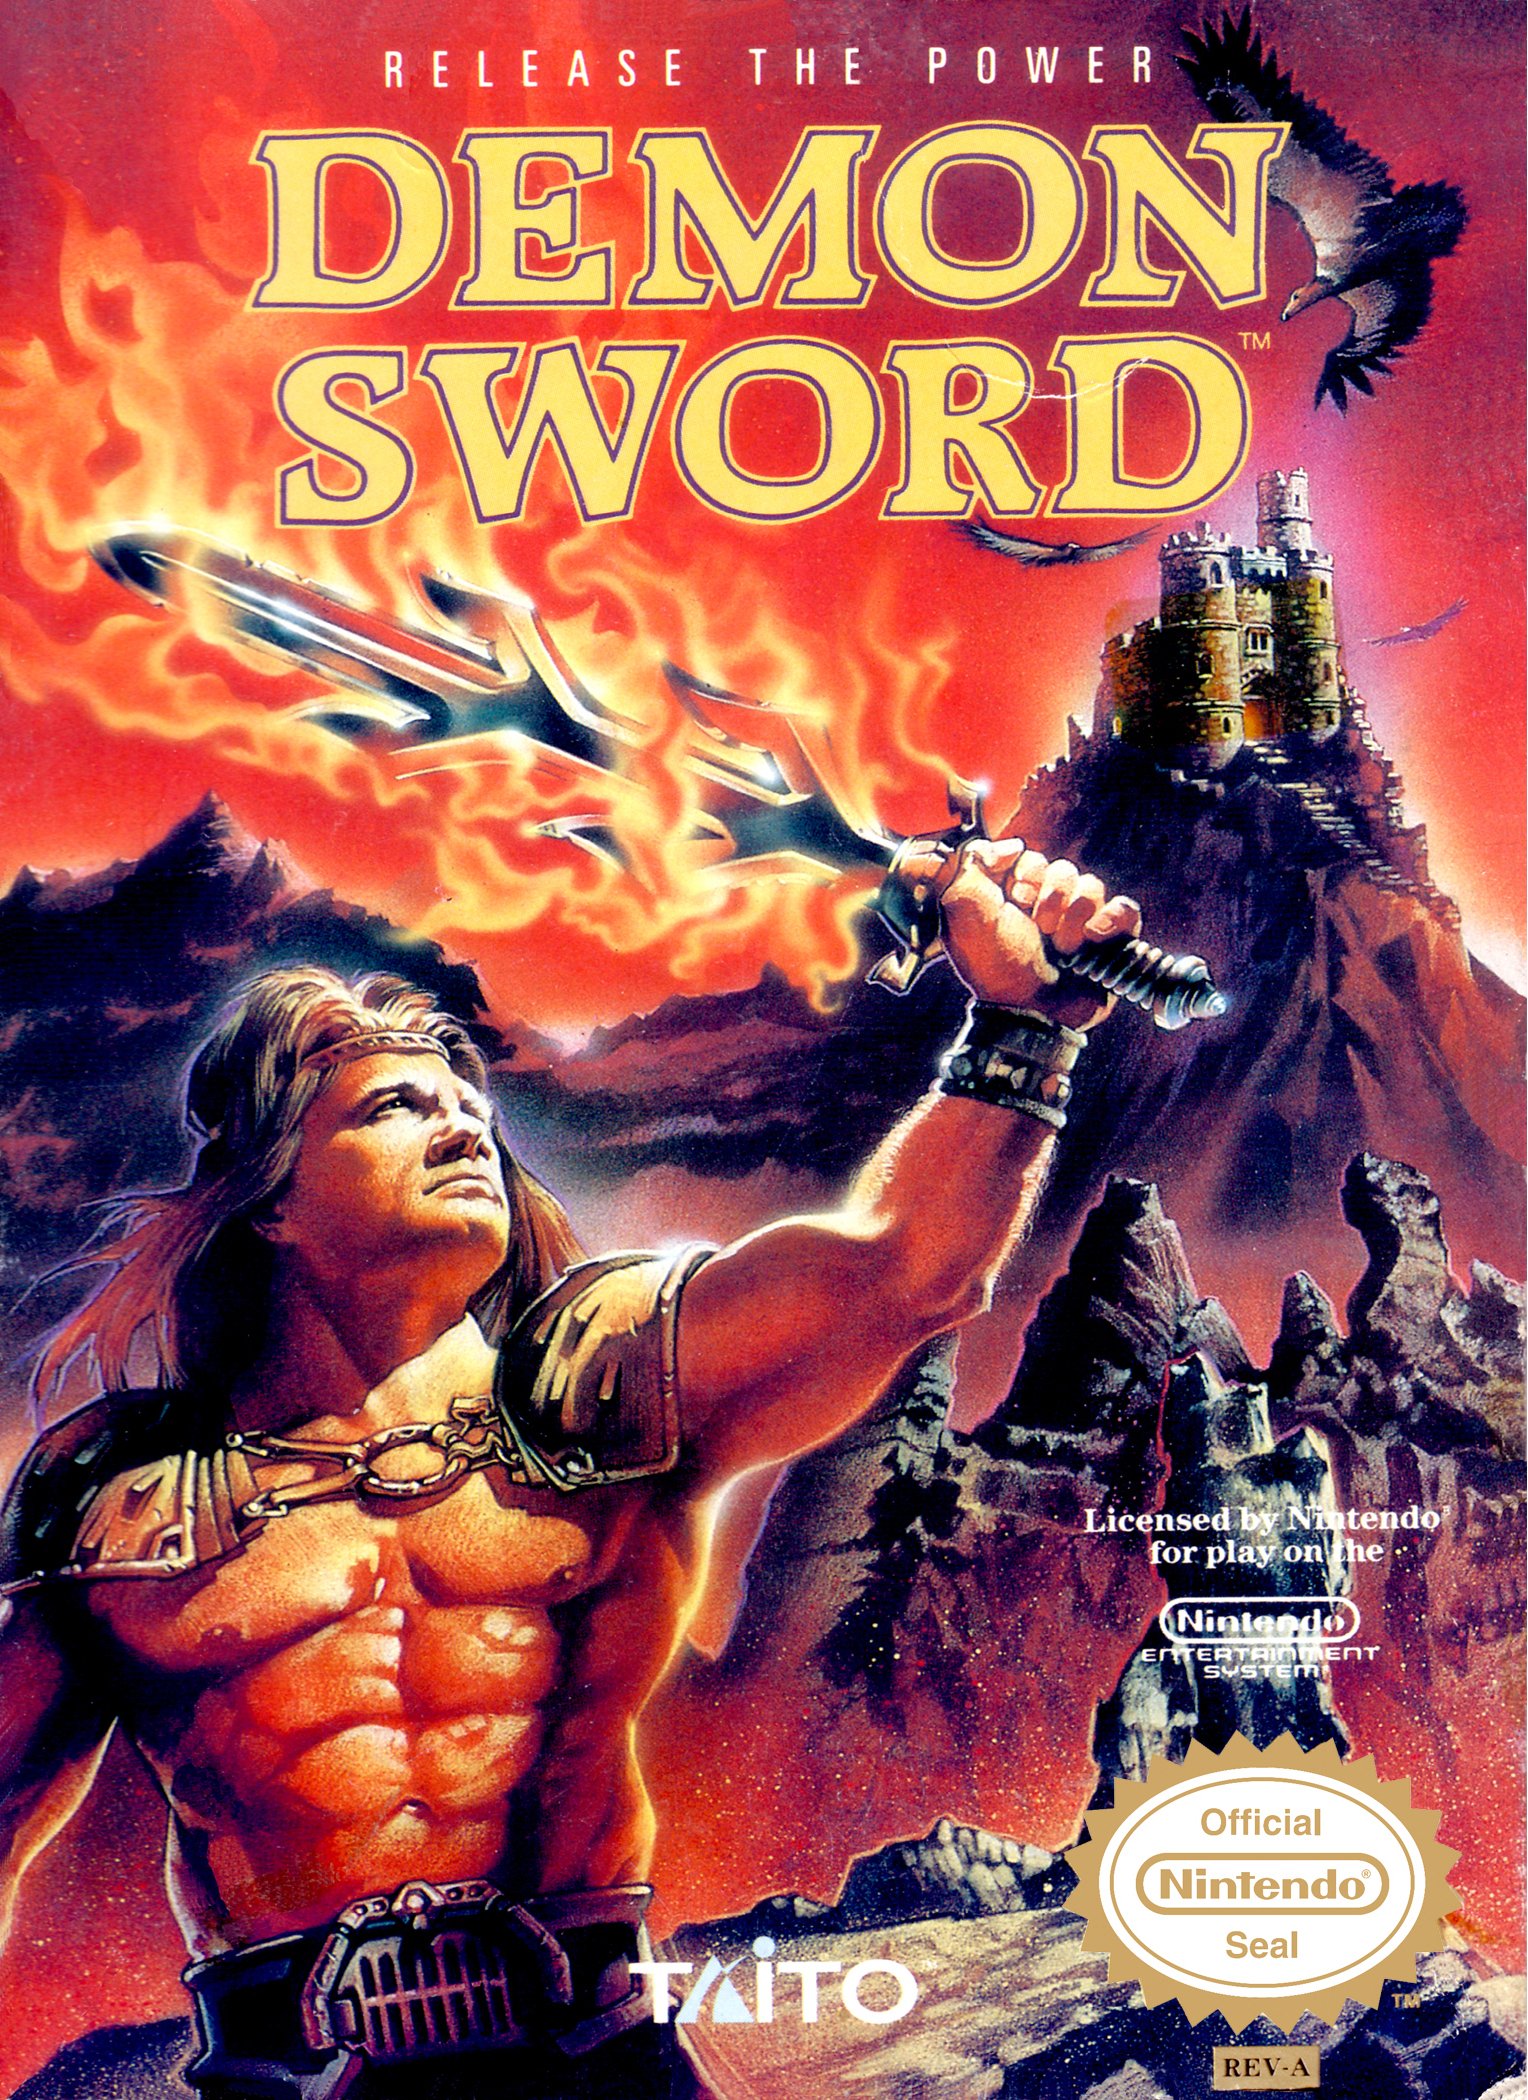 26 Fabulous Vintage Video Game Cover Art - Ftw Gallery | eBaum's World